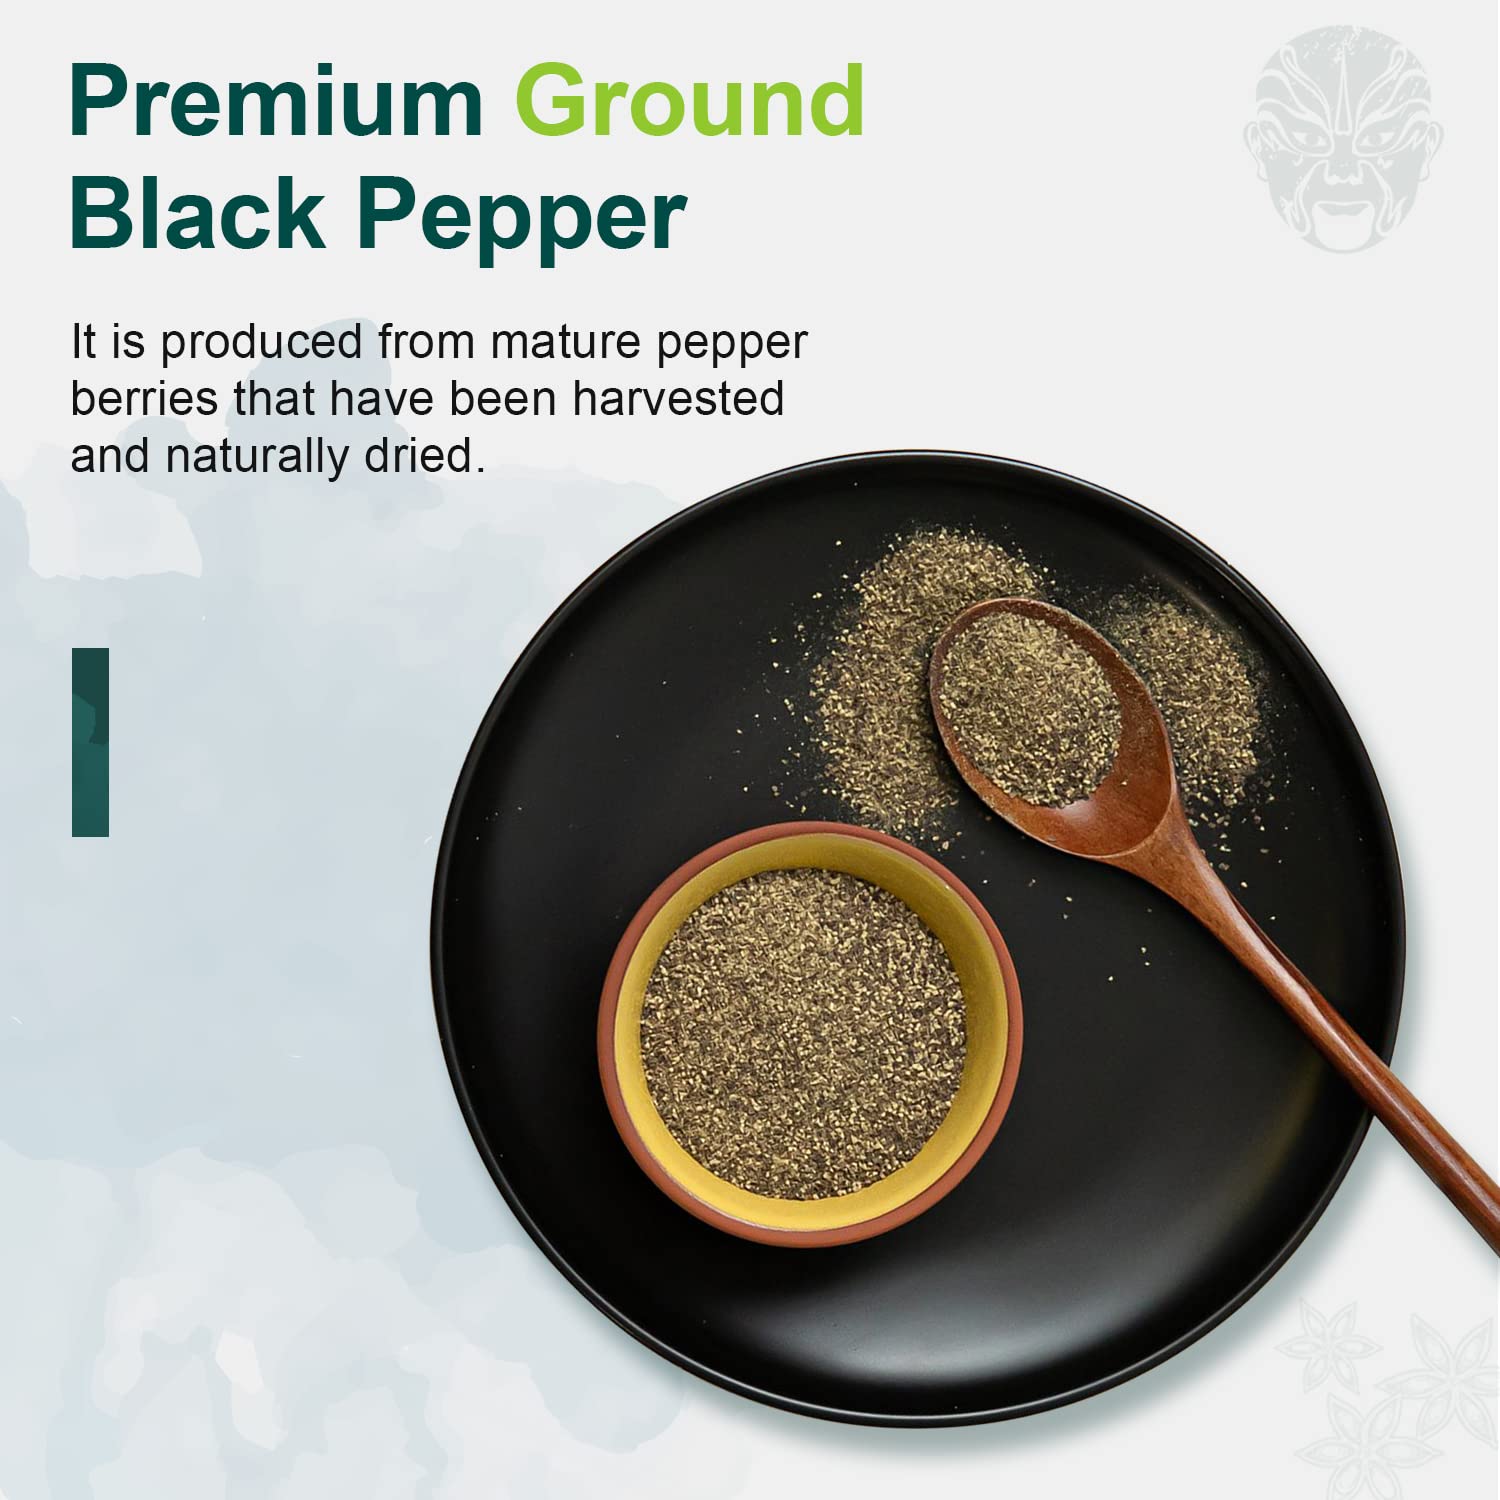 Soeos Table Ground Black Pepper, 18 oz (510g) Non-GMO, Freshly Peppercorn Powder Bulk, Packed to Keep Peppers Fresh, Ready to Use Peppercorns for Refill, Regular